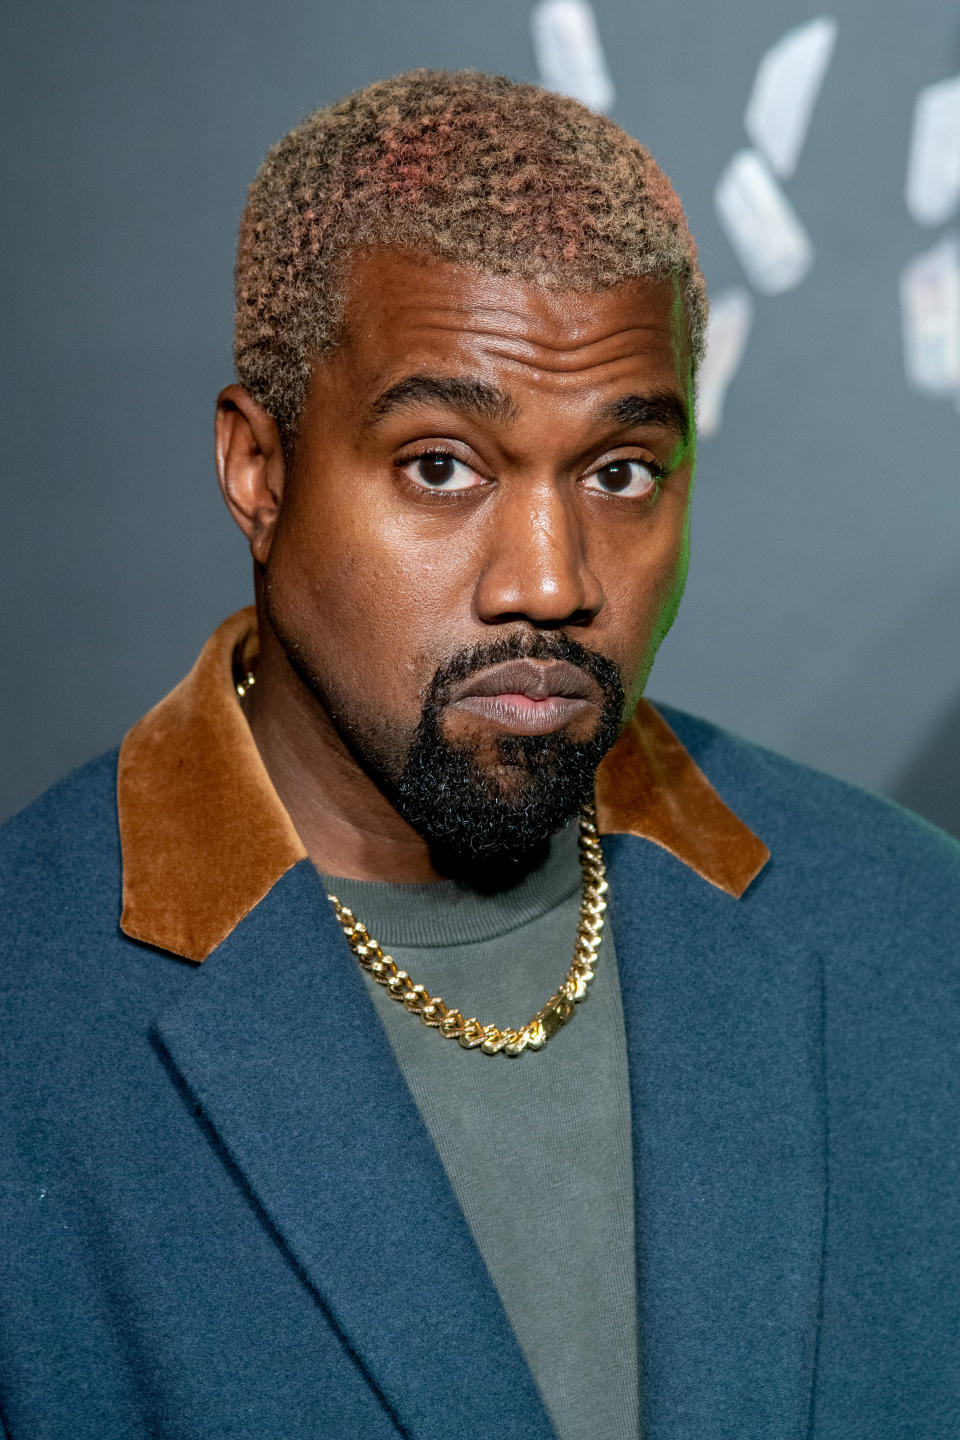 American rapper Kanye West posing for picture wearing teal jacket 